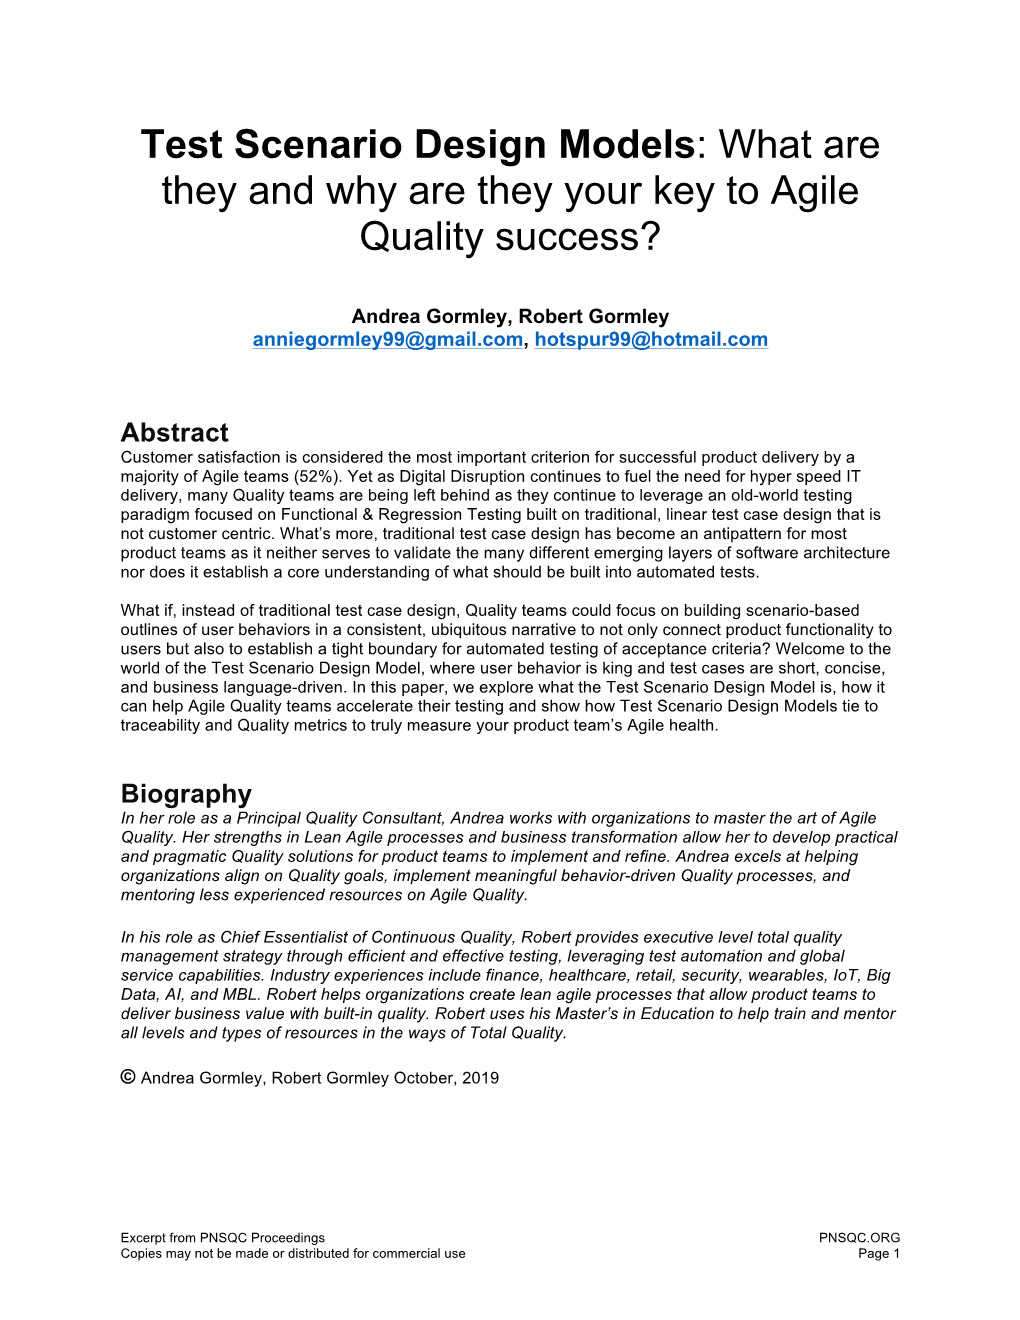 Test Scenario Design Models: What Are They and Why Are They Your Key to Agile Quality Success?